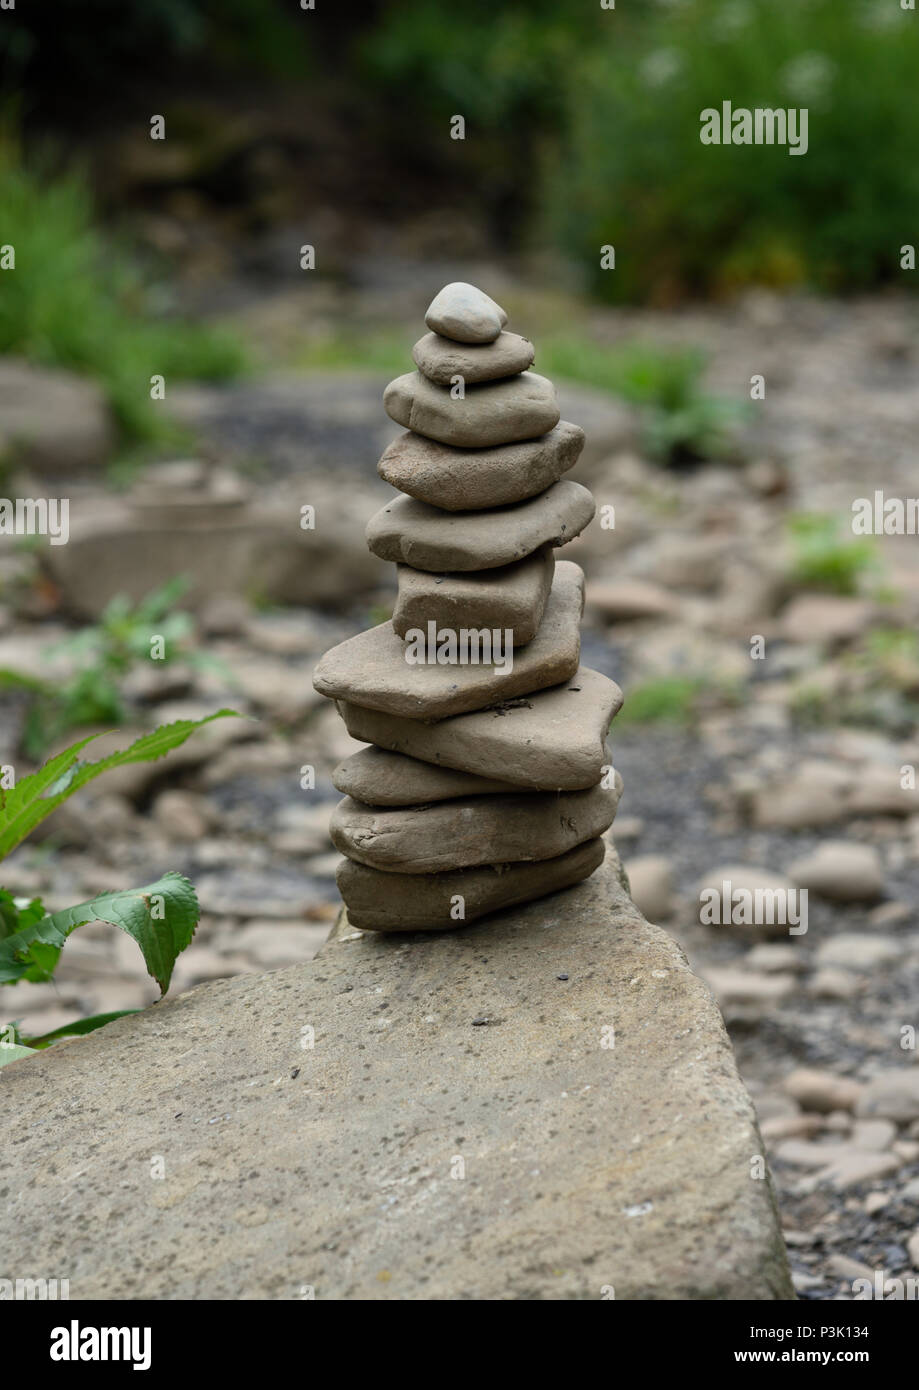 Stone balancing, stones balanced on top of one another on a large rock in burrs country park bury lancashire uk Stock Photo